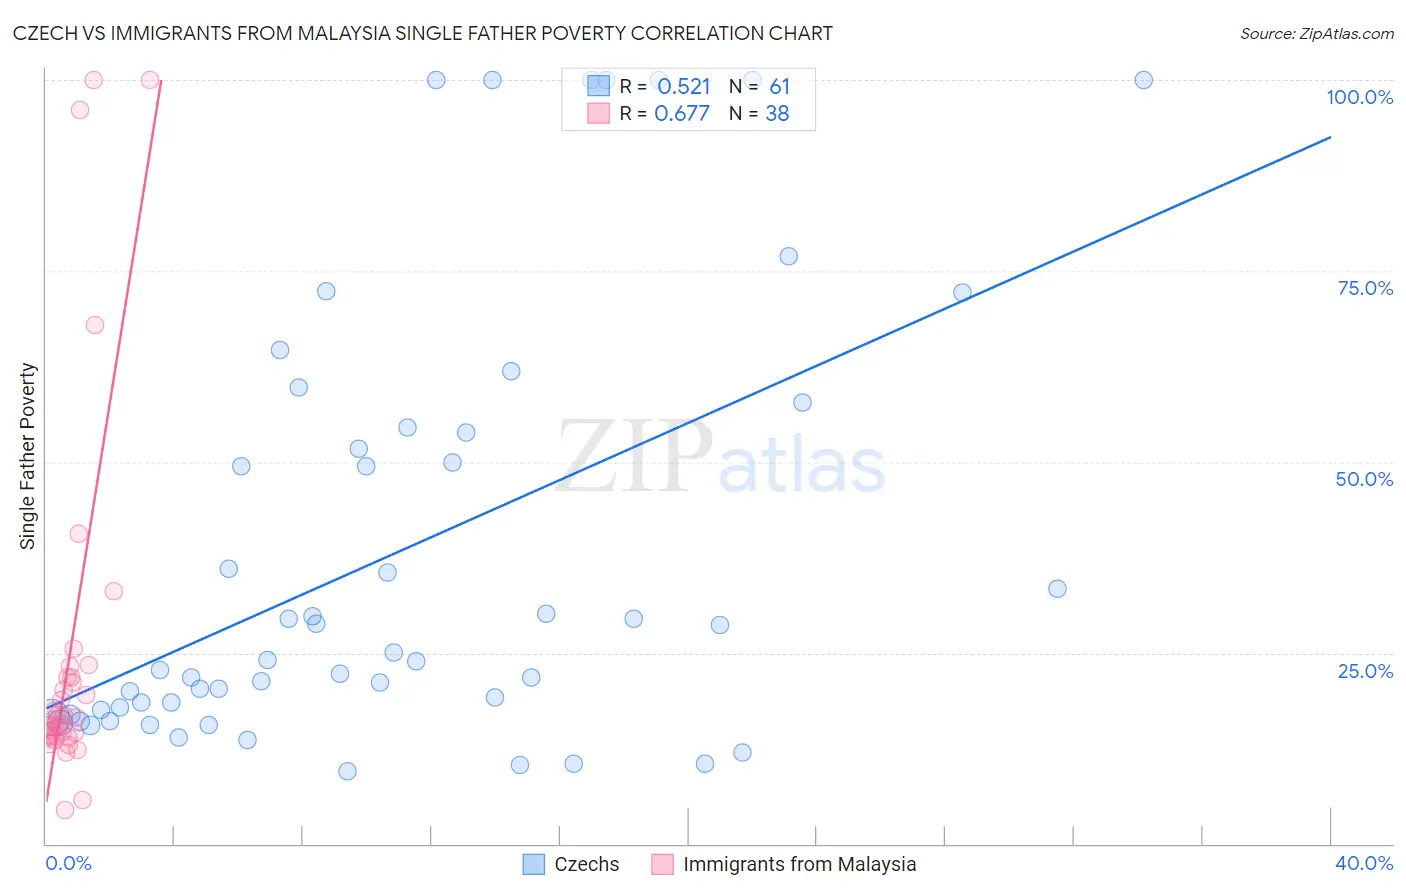 Czech vs Immigrants from Malaysia Single Father Poverty